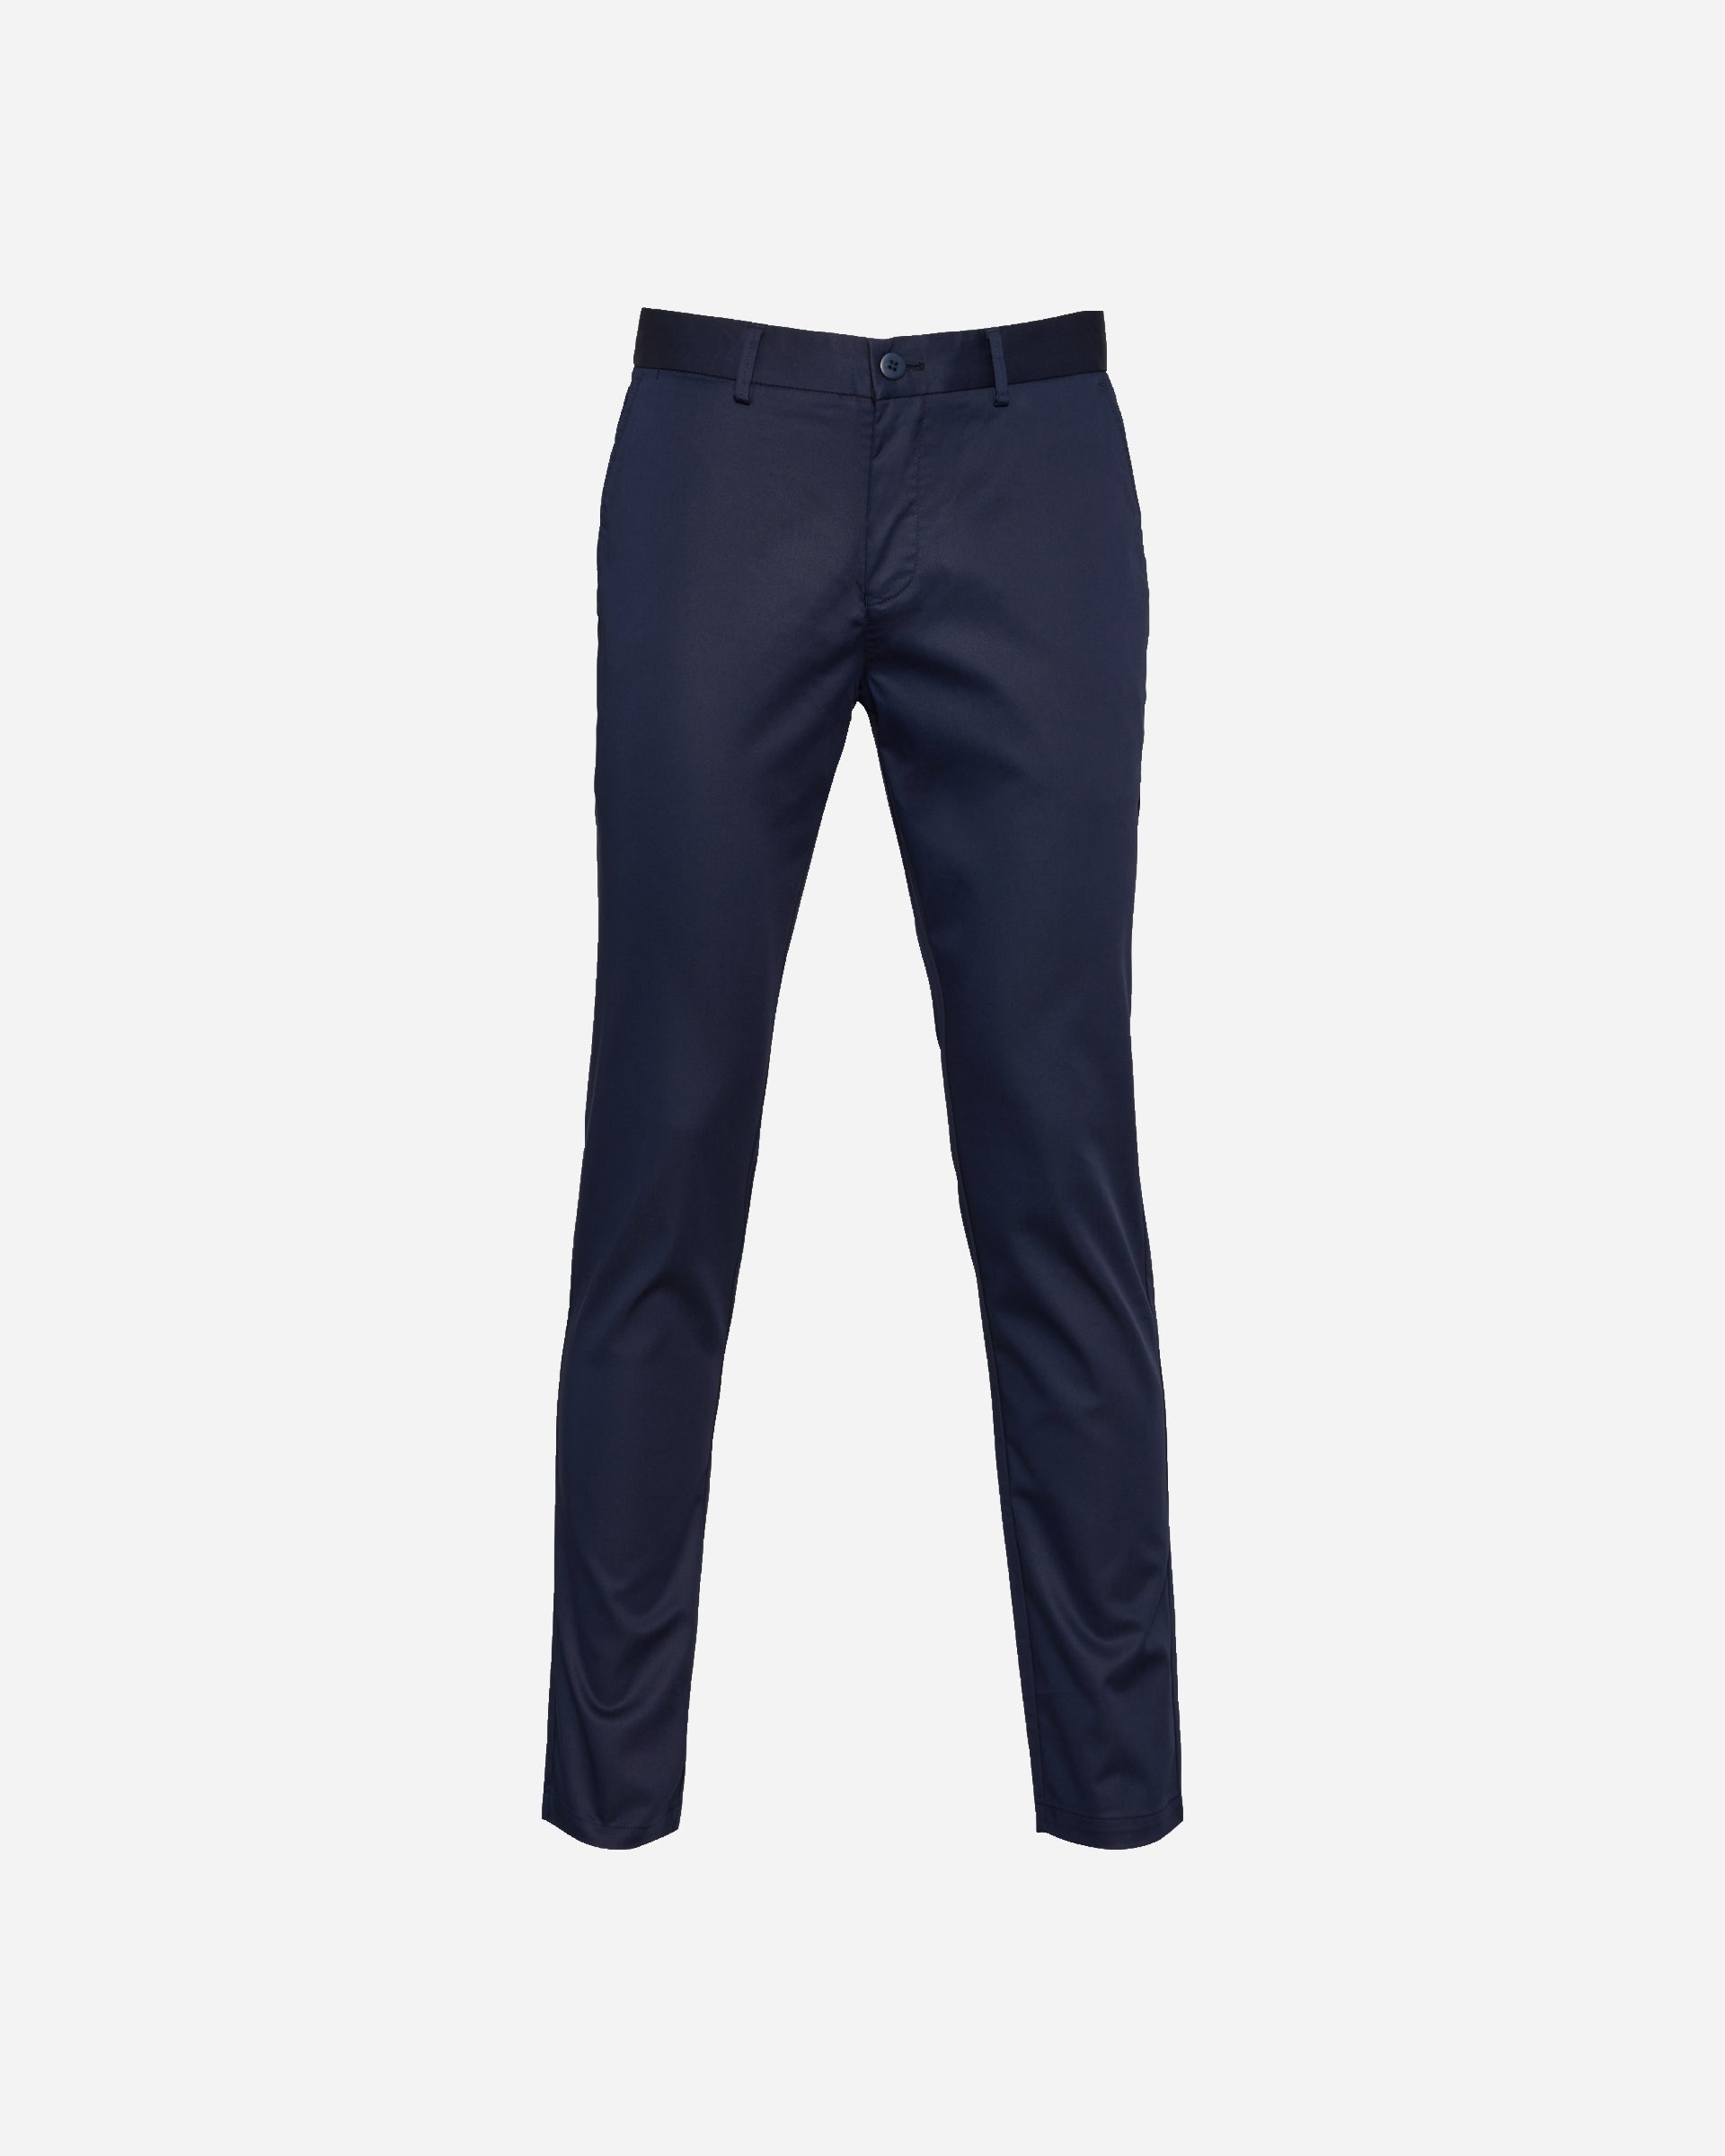 Soft-Touch Dress Chino - Men's Pants at Menzclub